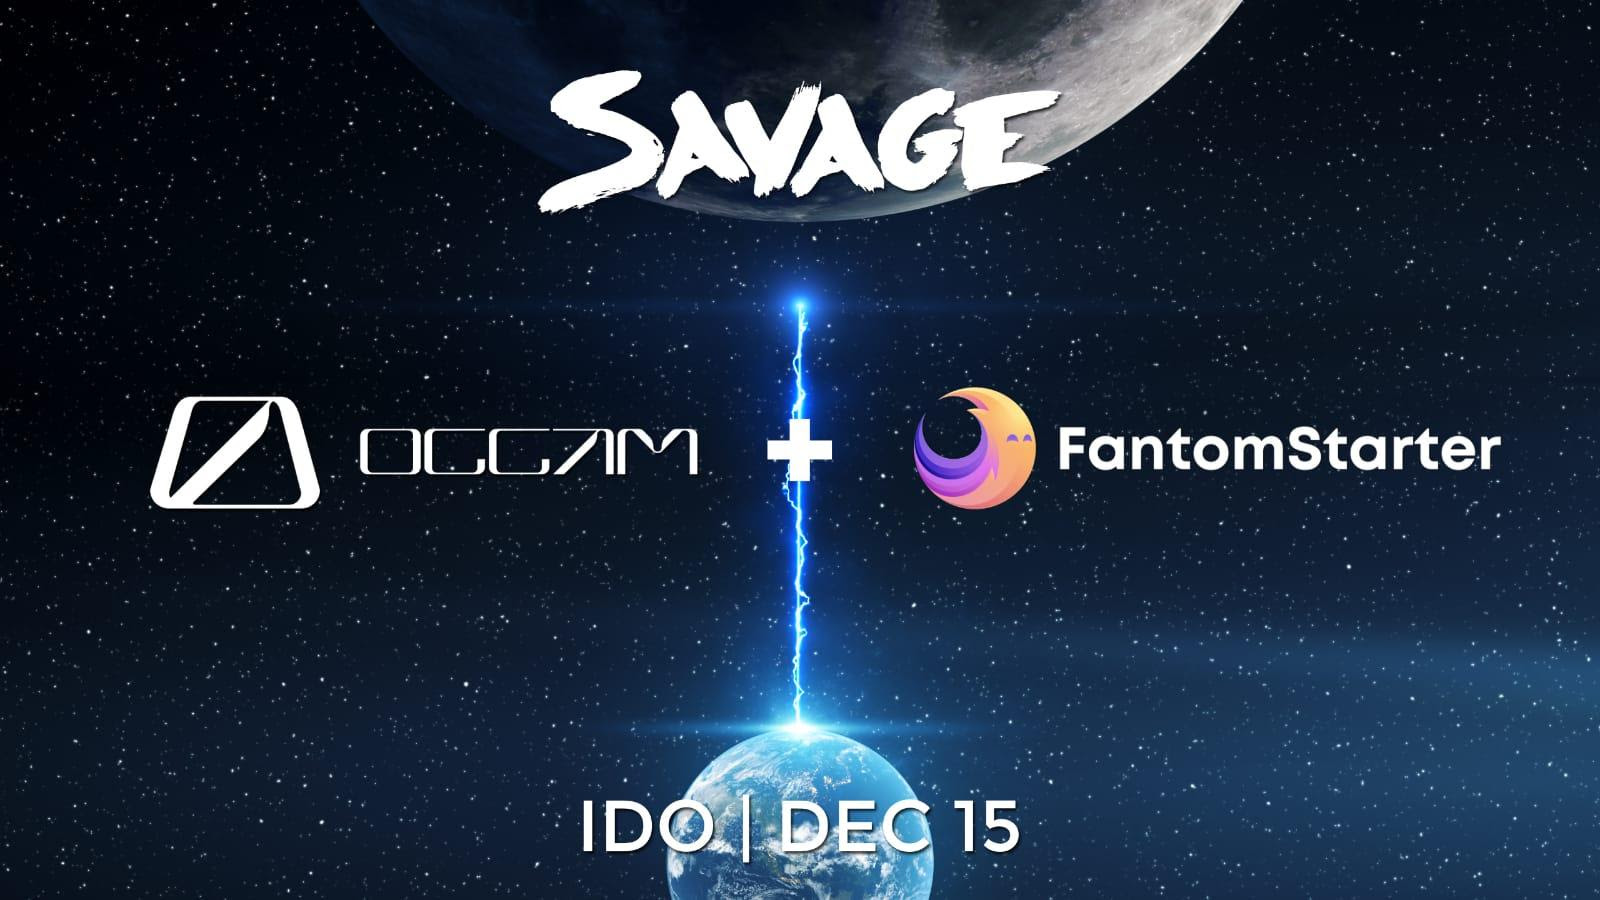 World’s First Carbon-Neutral NFT Marketplace SAVAGE Announces IDO